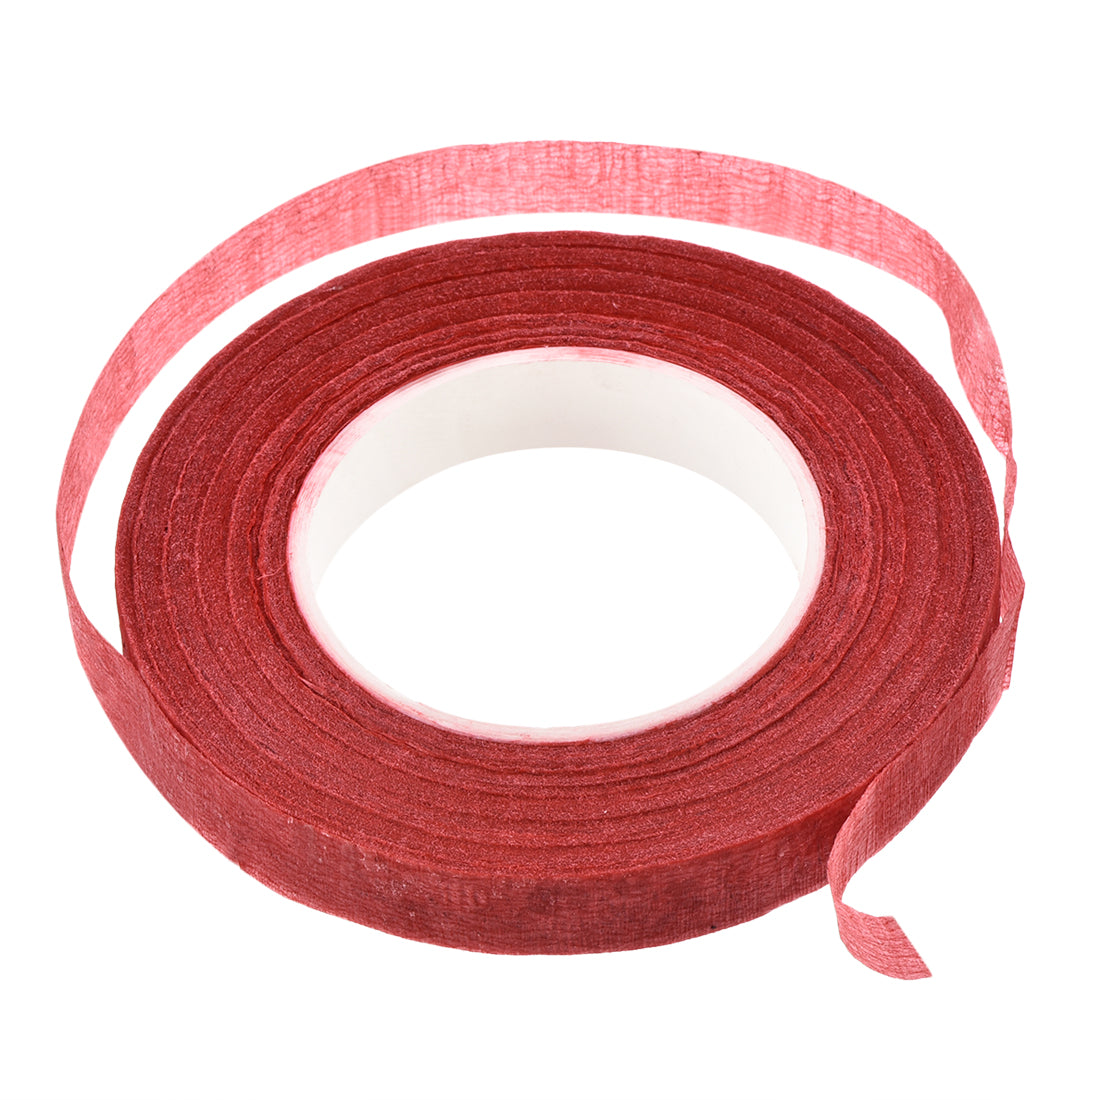 uxcell Uxcell 4Roll 1/2"x30Yard Red Floral Tape Flower Adhesives Floral Arrangement Kit